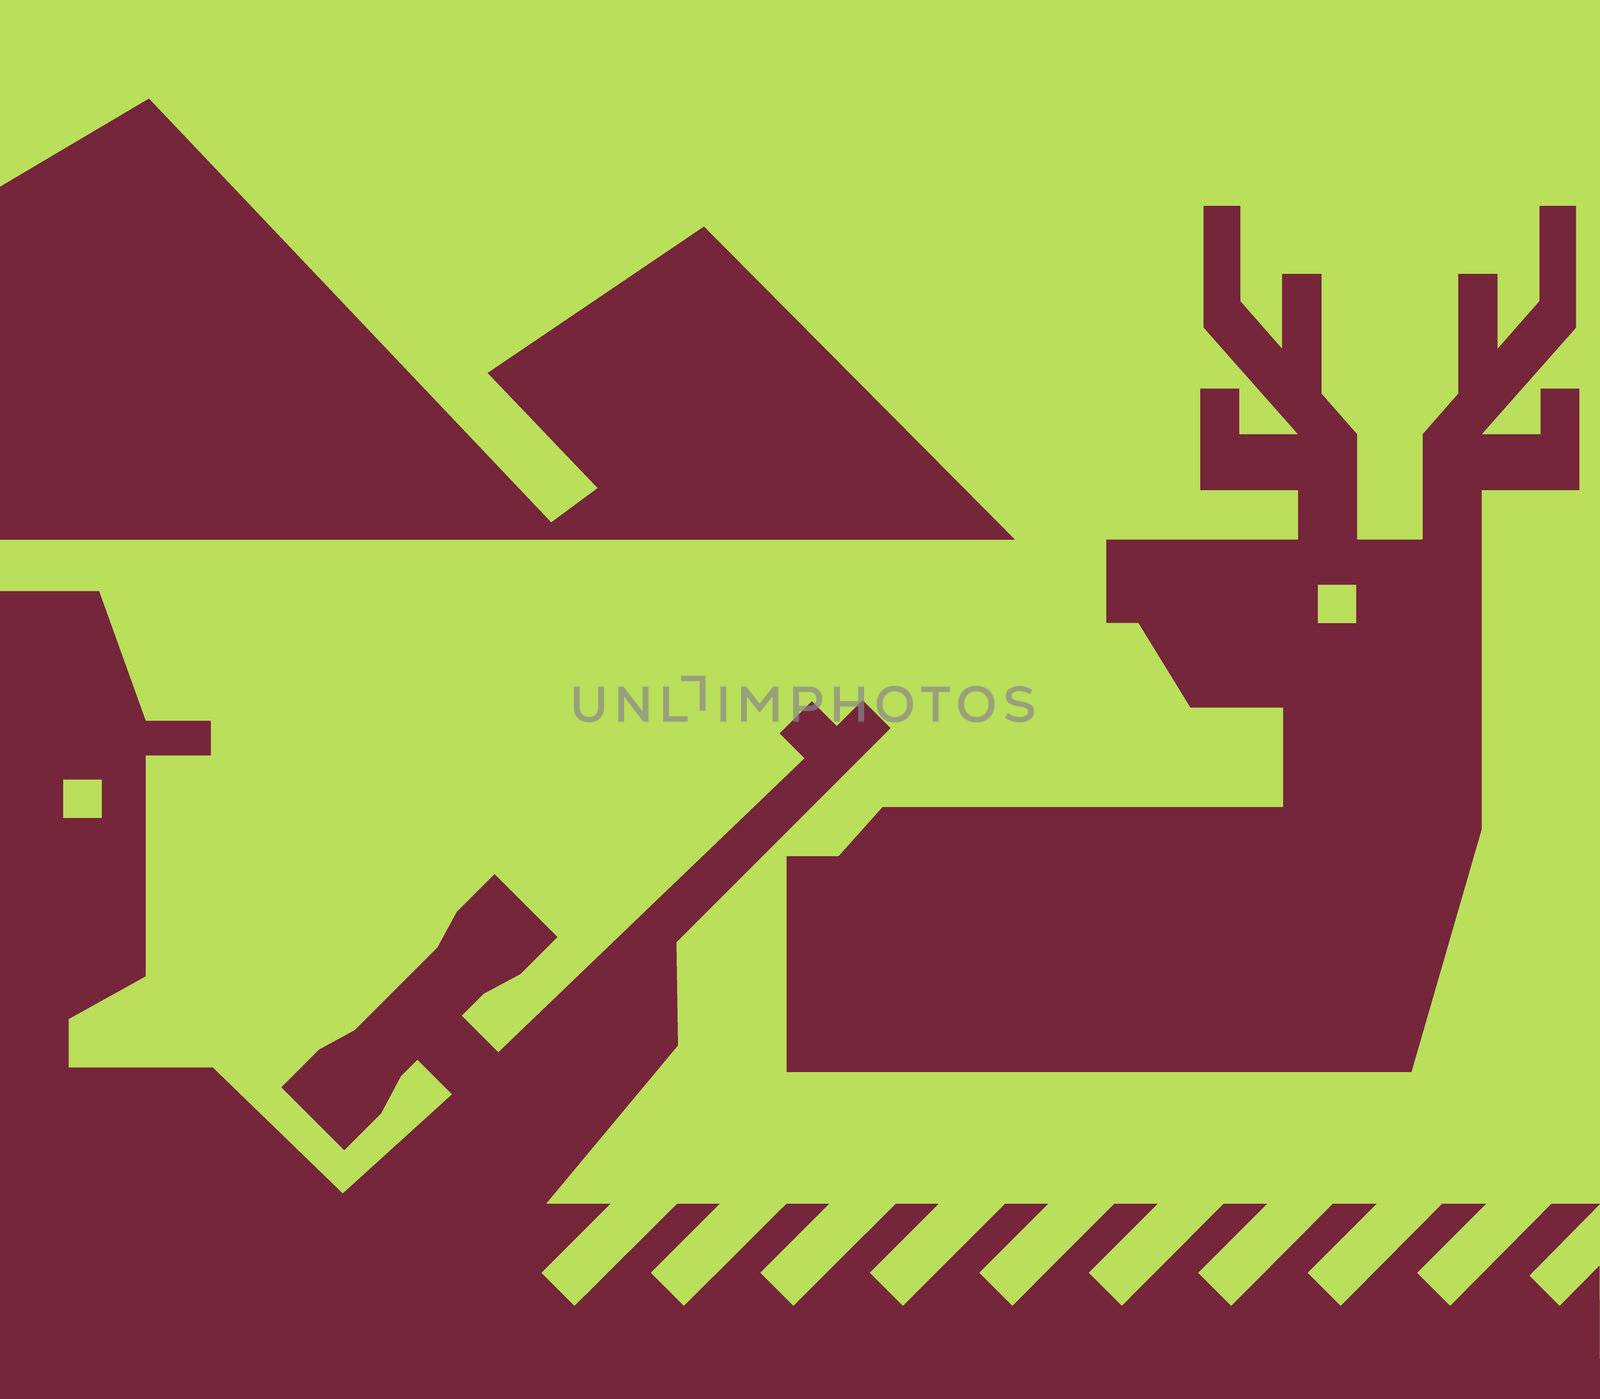 Imagery show a stylized hunter with rifle stalking a wild deer